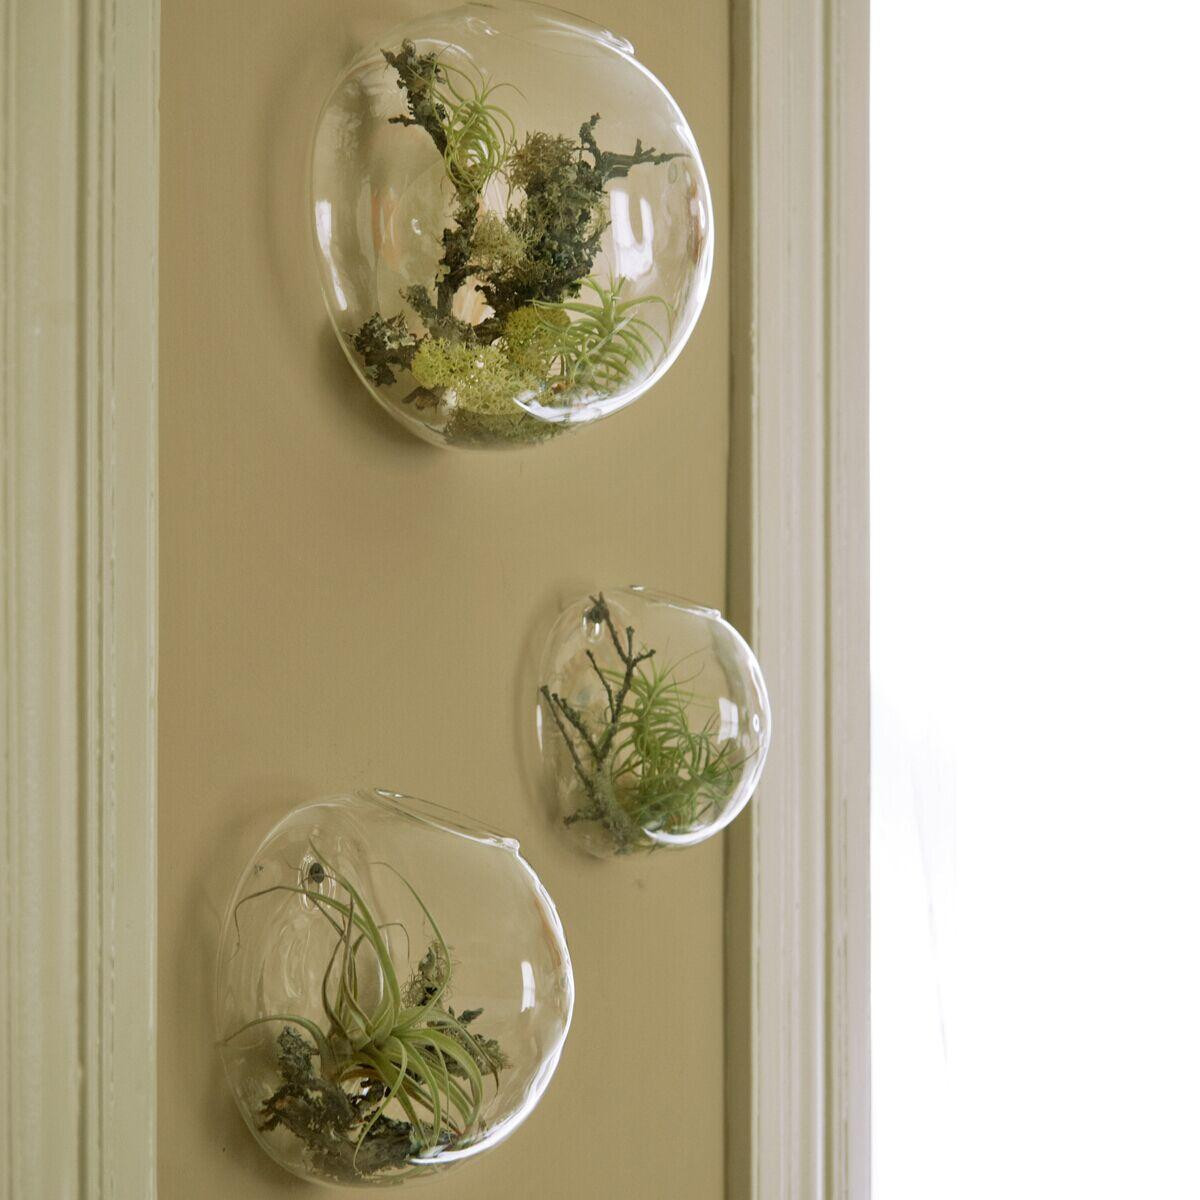 flat round glass vase of wall bubble terrariums glass wall vase for flowers indoor plants inside wall bubble terrariums glass wall vase for flowers indoor plants wall mounted planter for succulents air plant holders home decor wall bubble terrariums